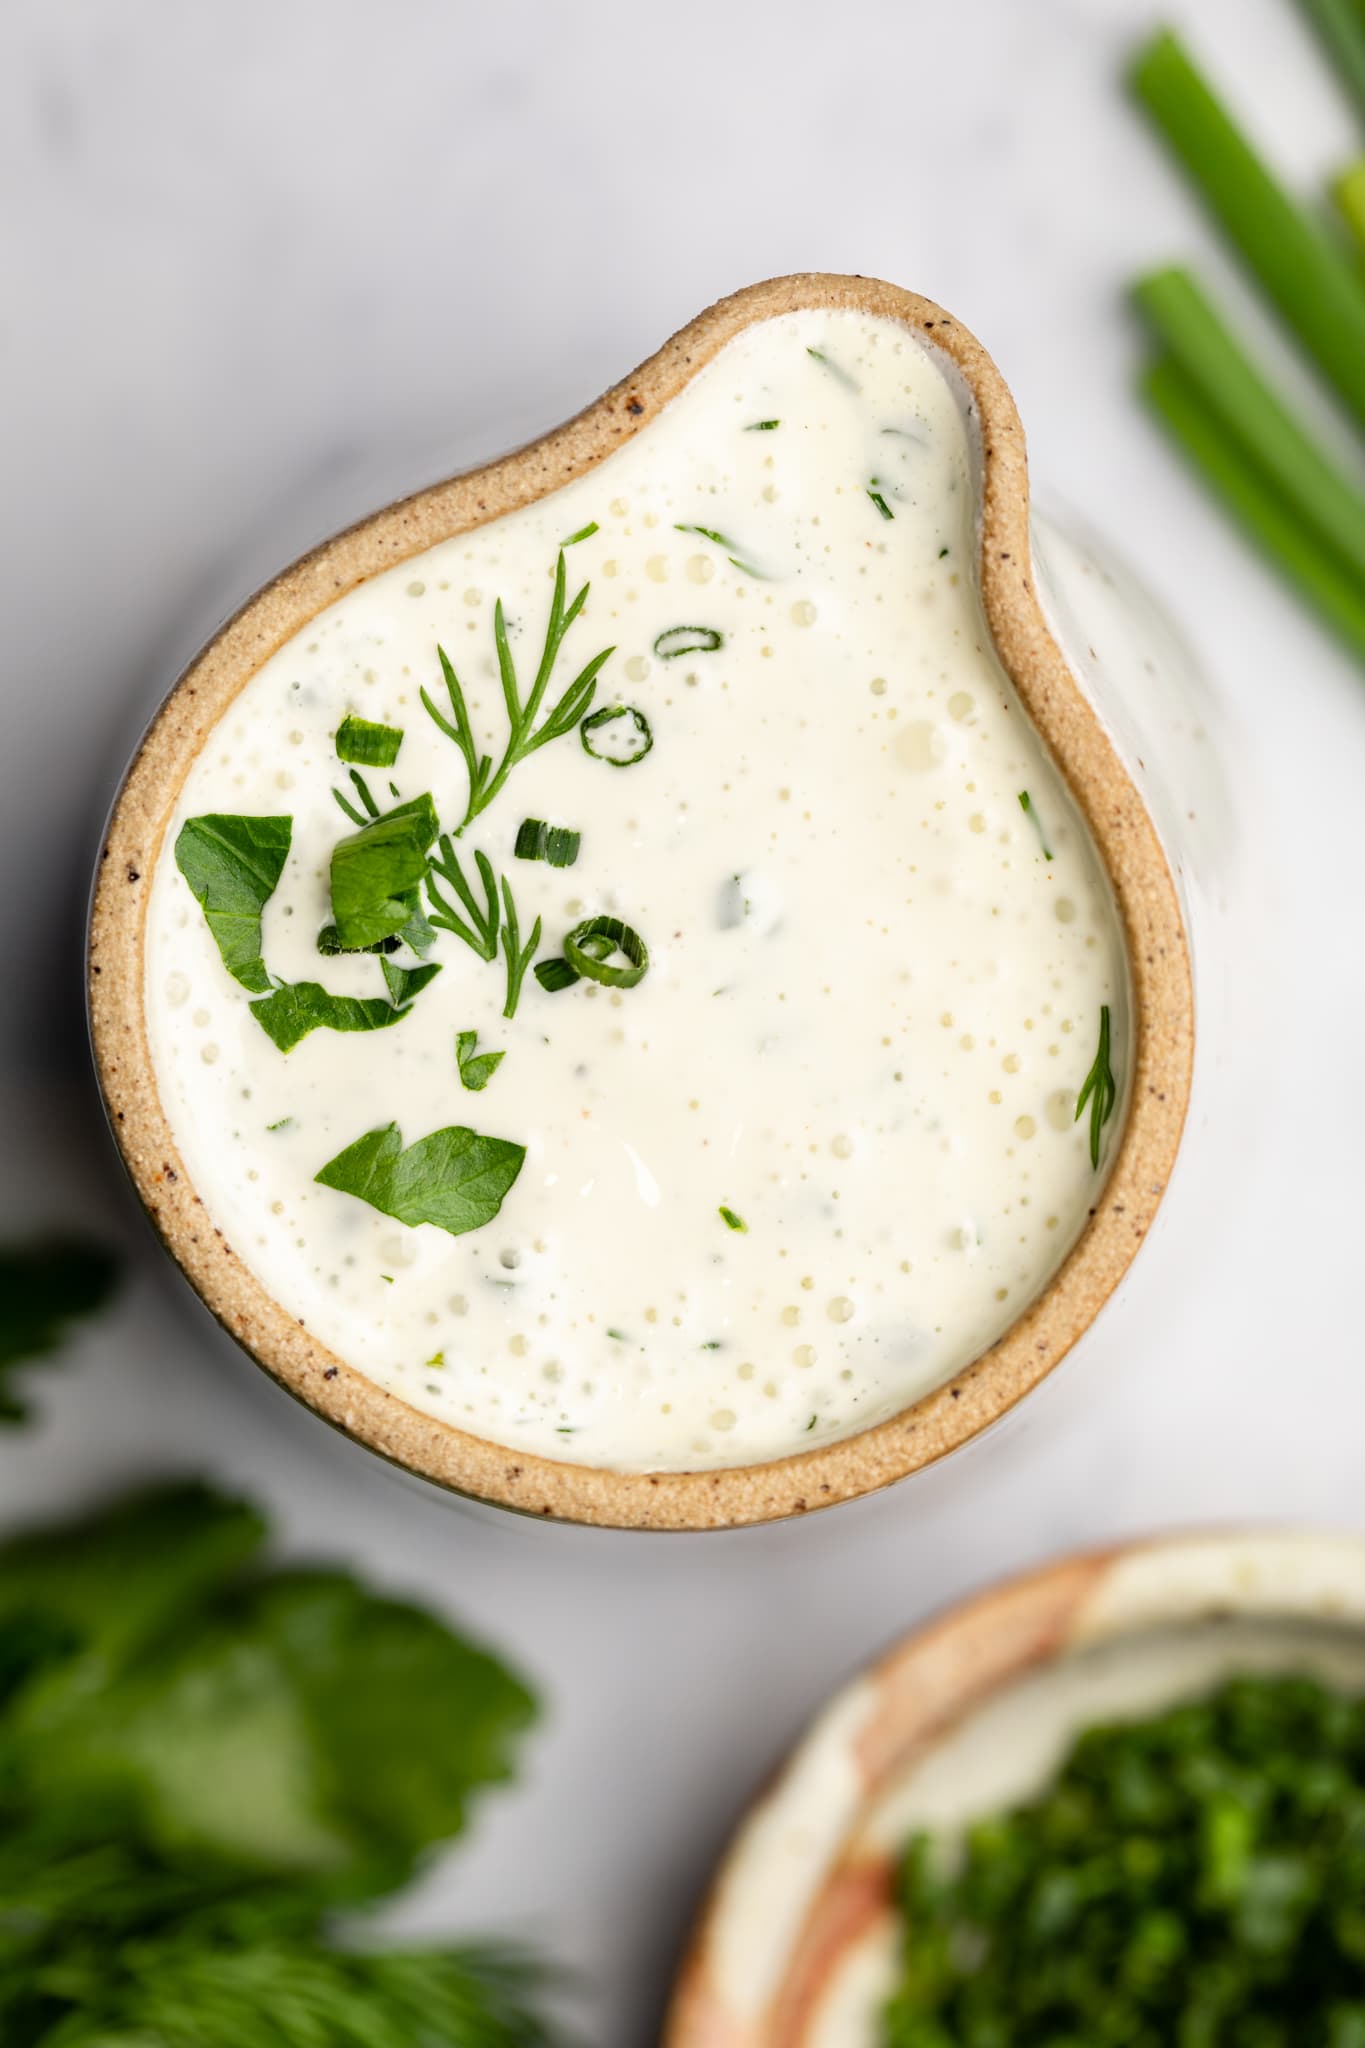 https://allthehealthythings.com/wp-content/uploads/2021/01/whole30-ranch-dressing-6.jpg